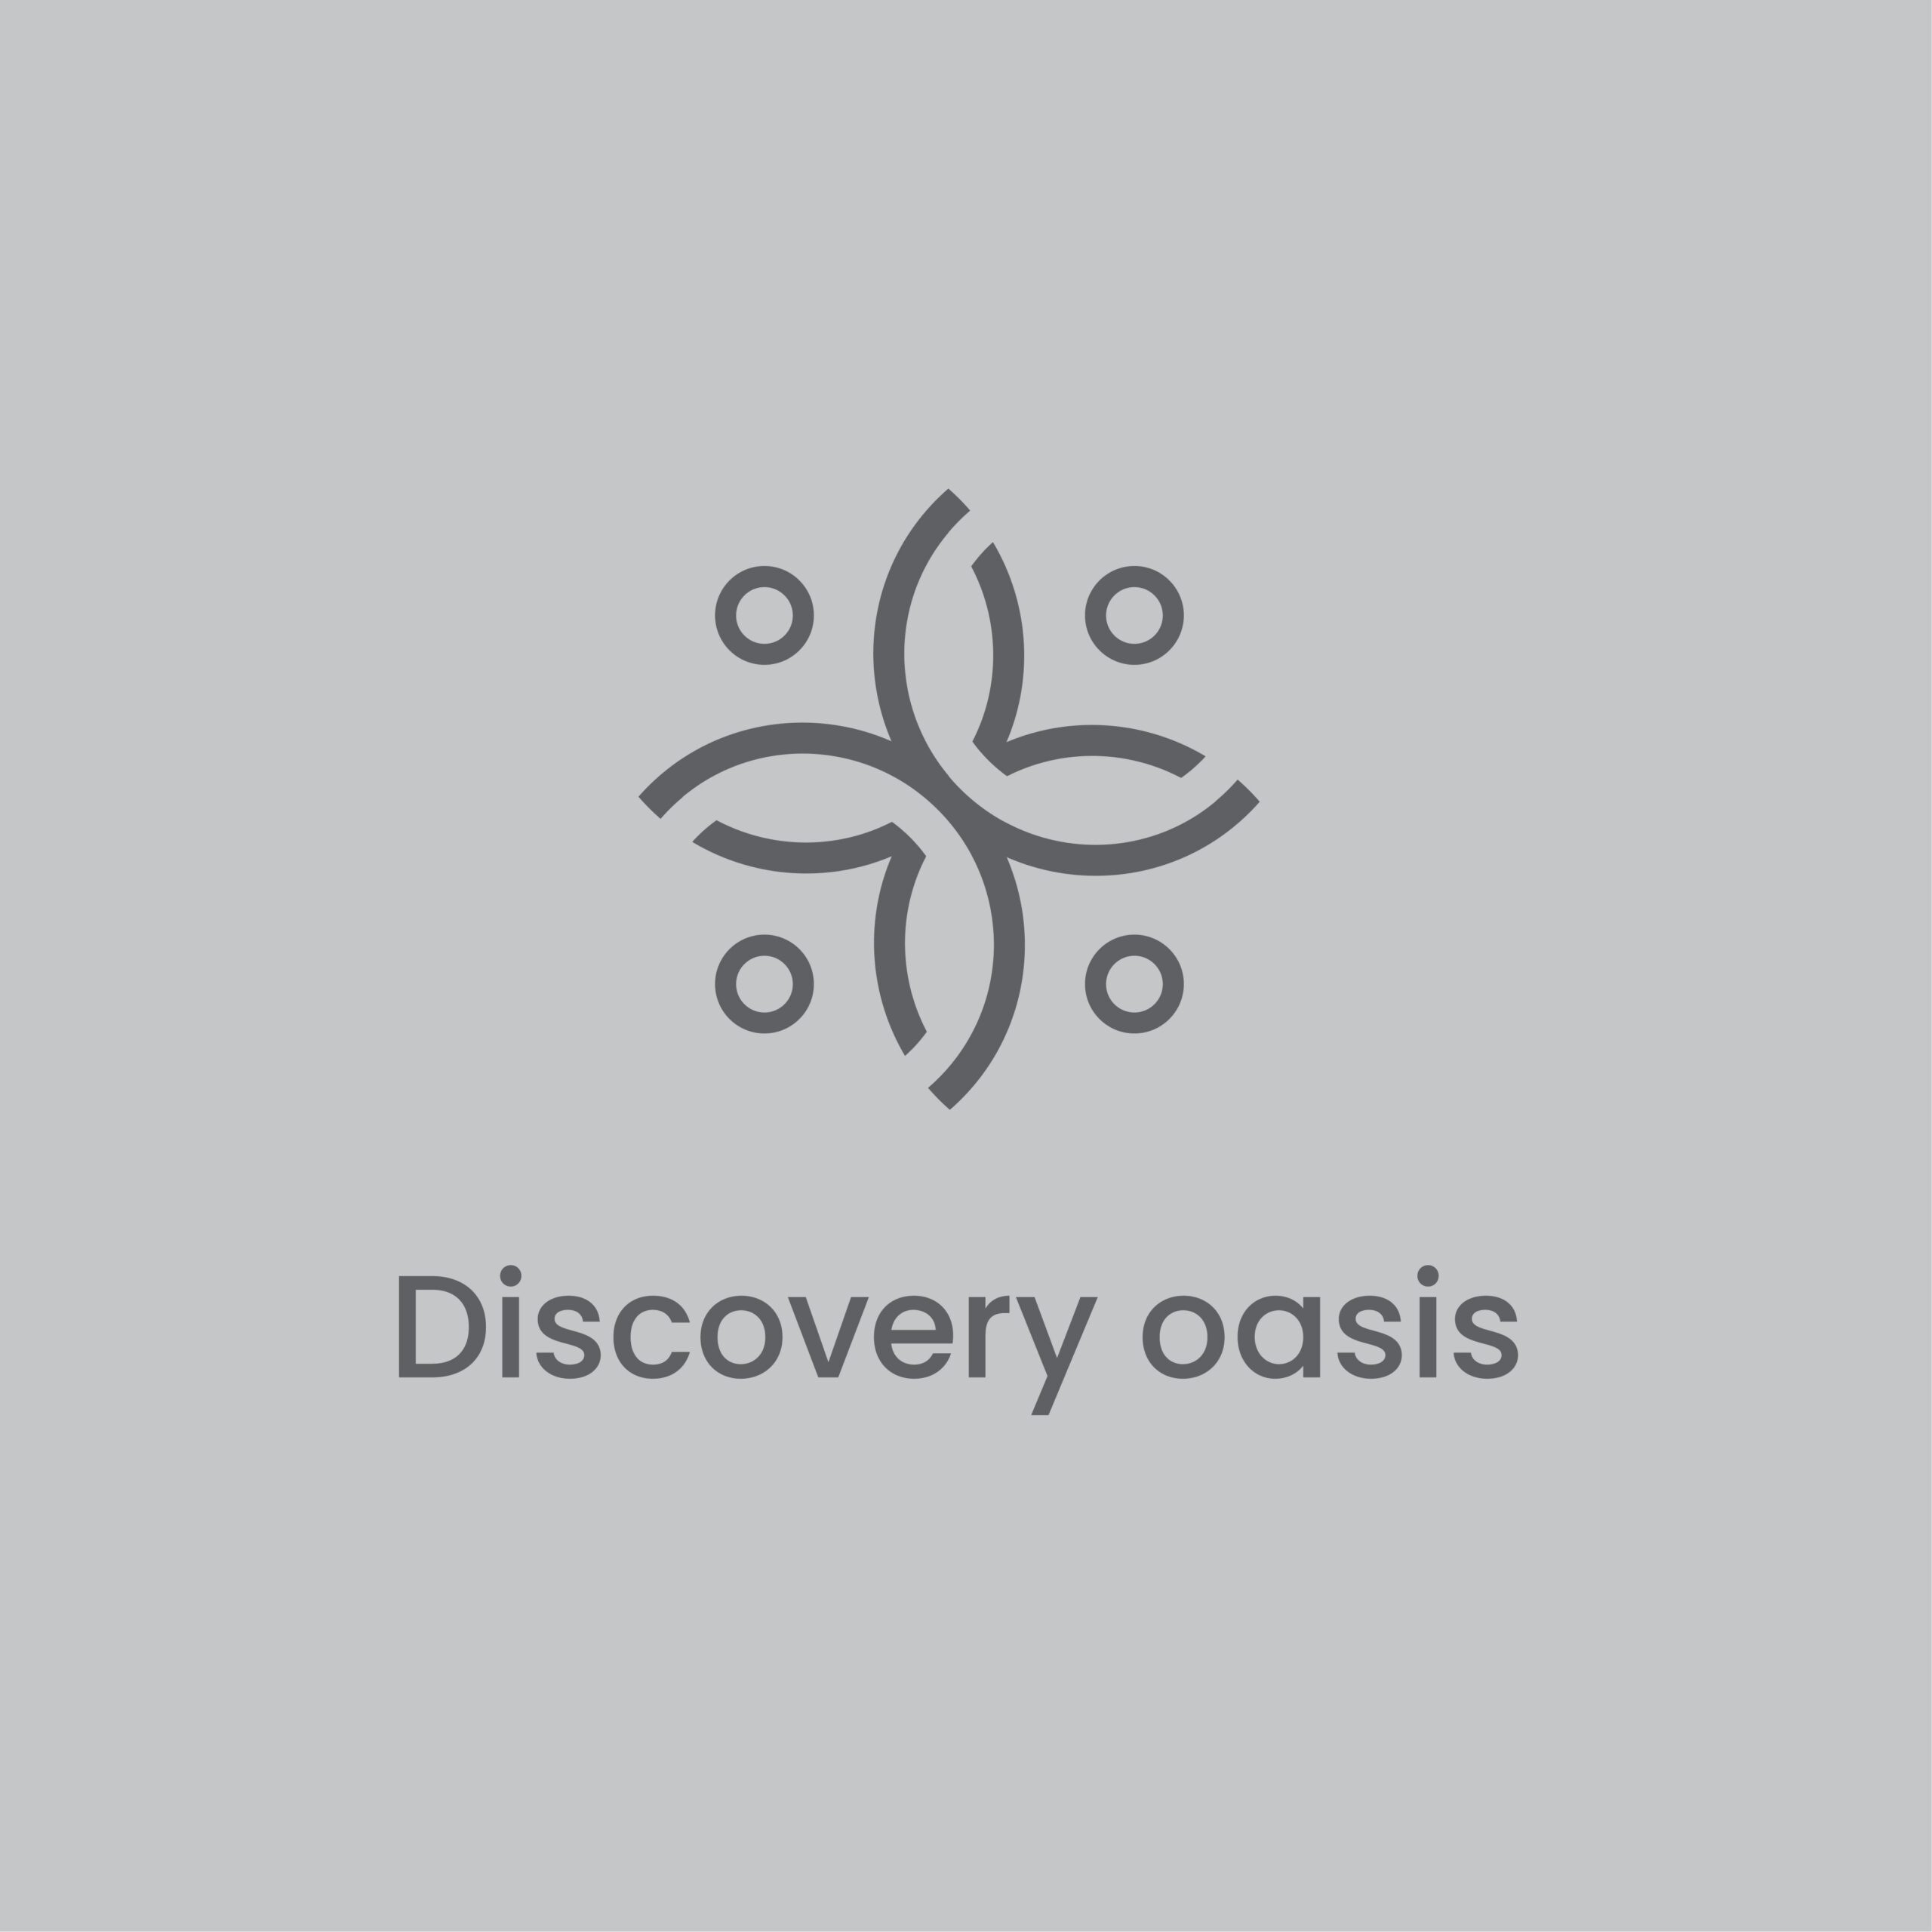 Discovery-oasis-logo-variations-06